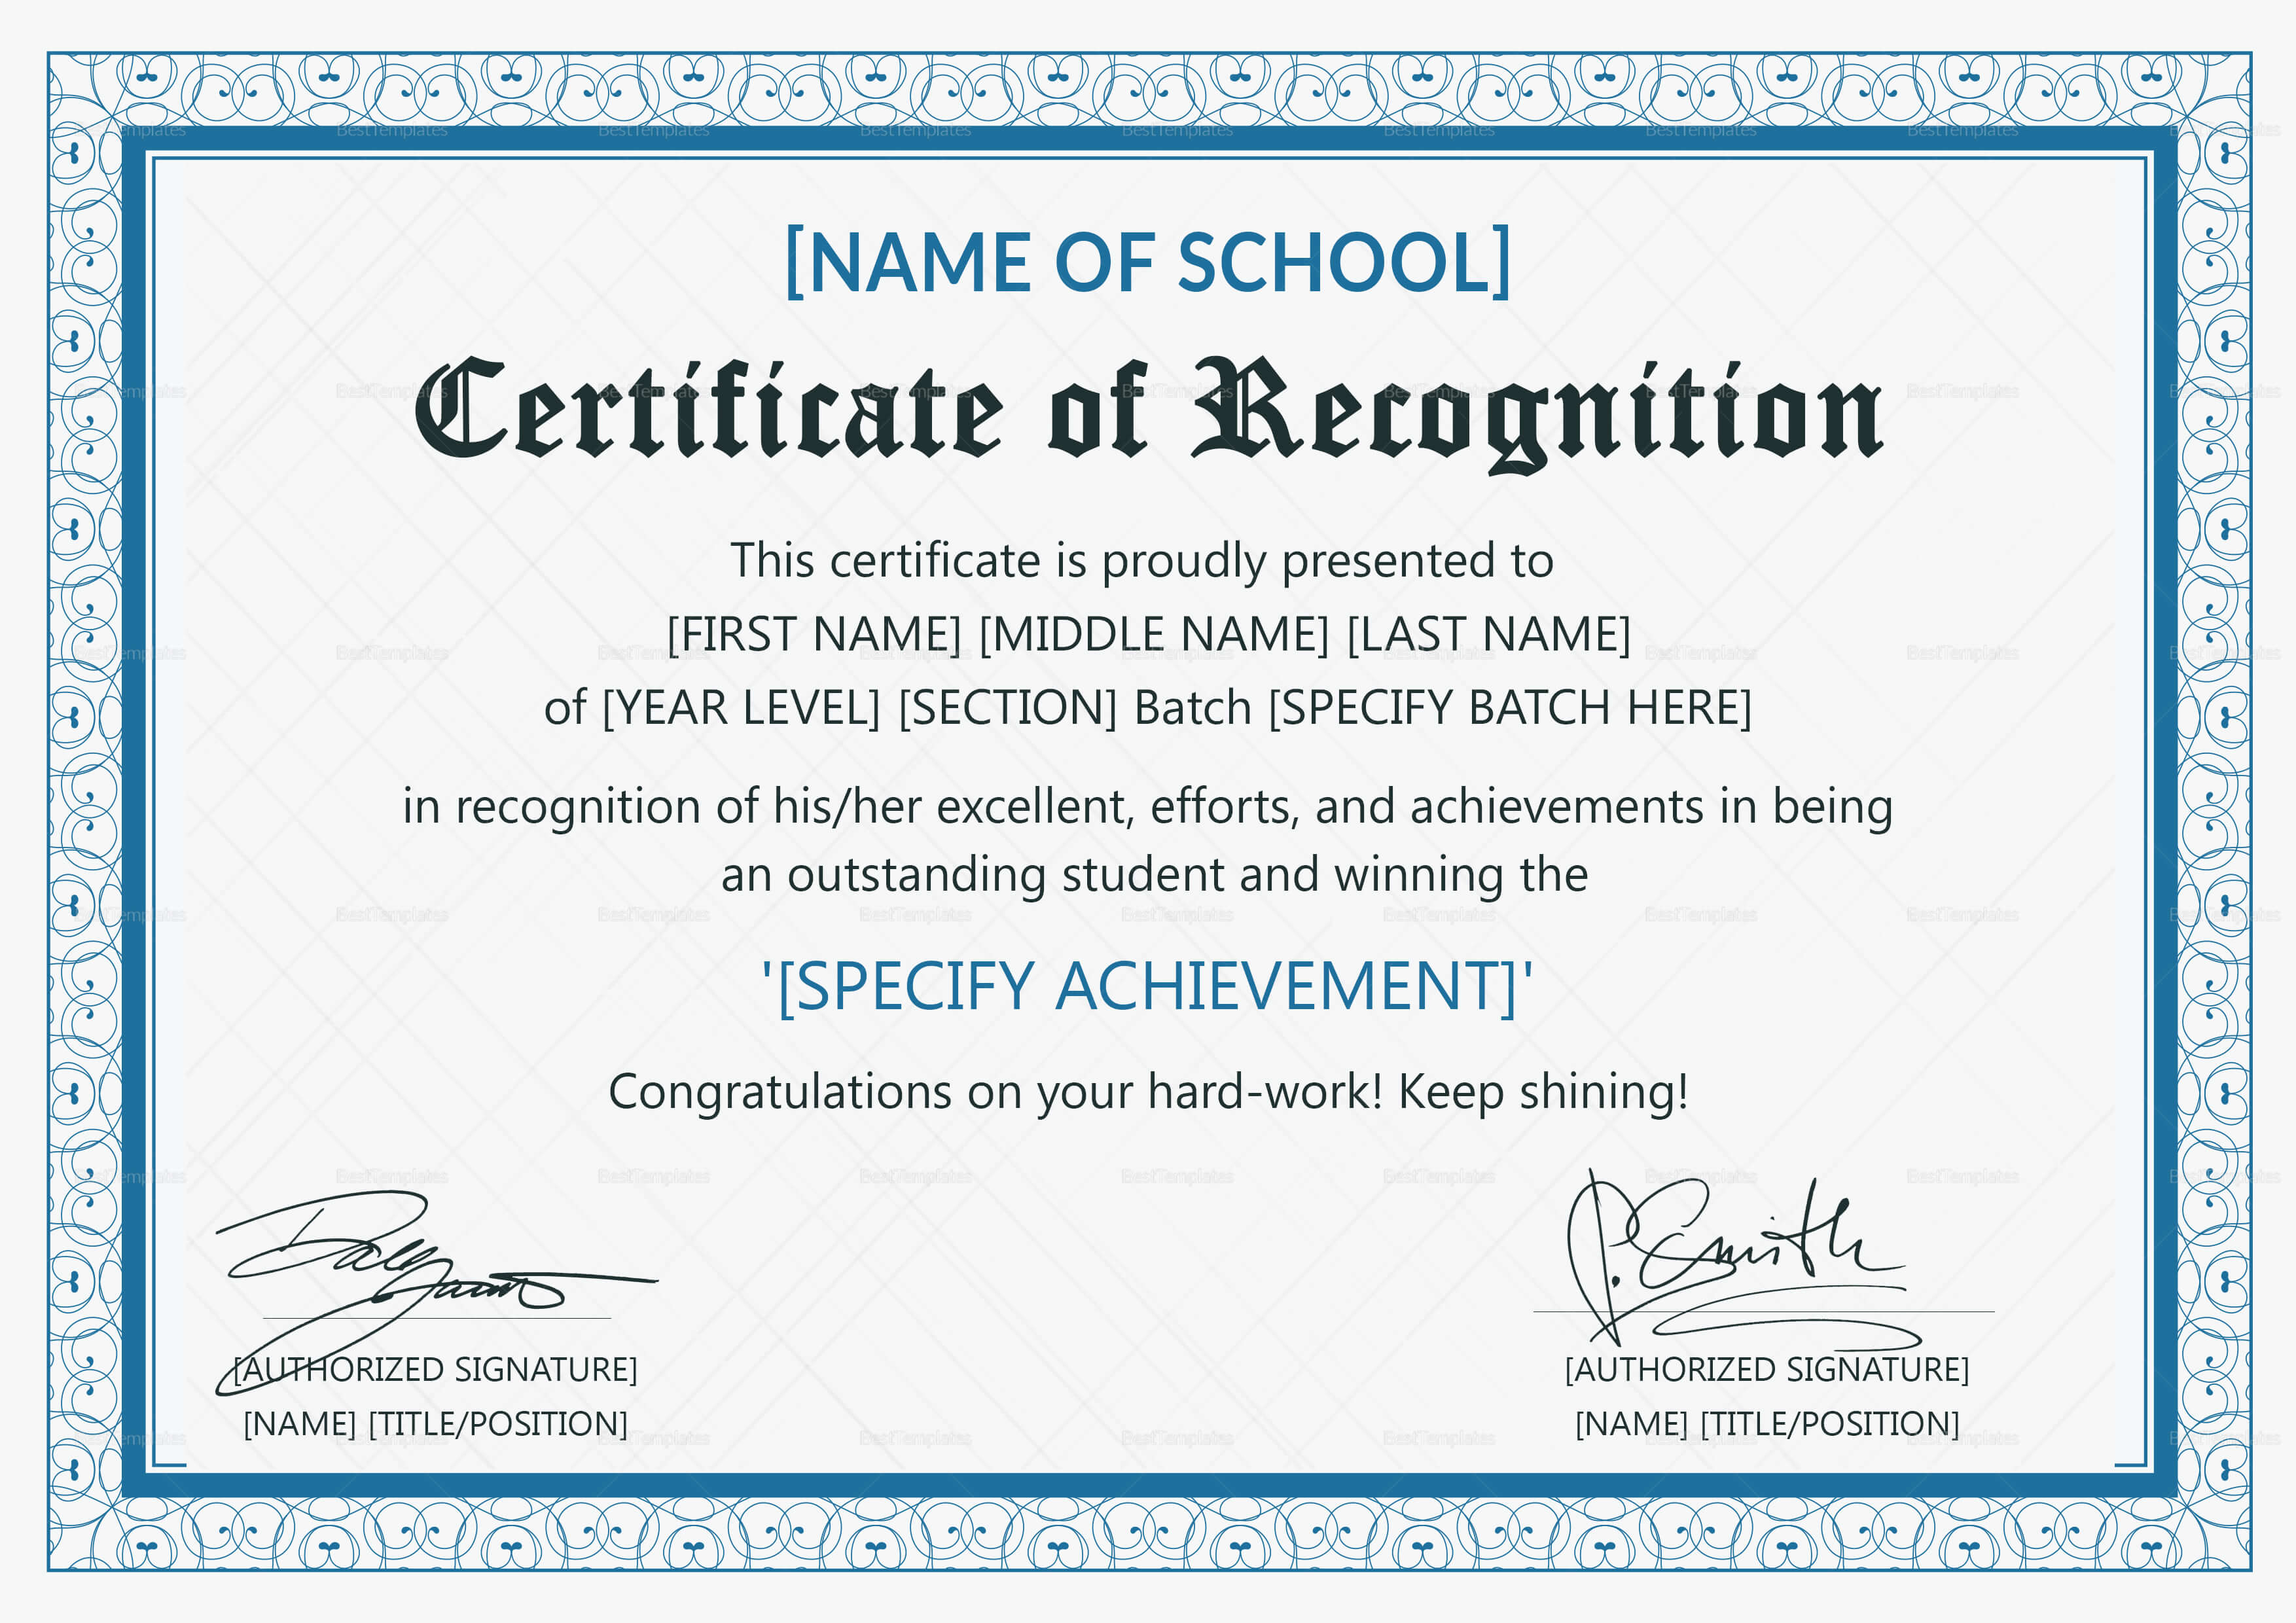 Certificate Of Recognition Template Letter Sample Deped 2019 Inside Sample Certificate Of Recognition Template